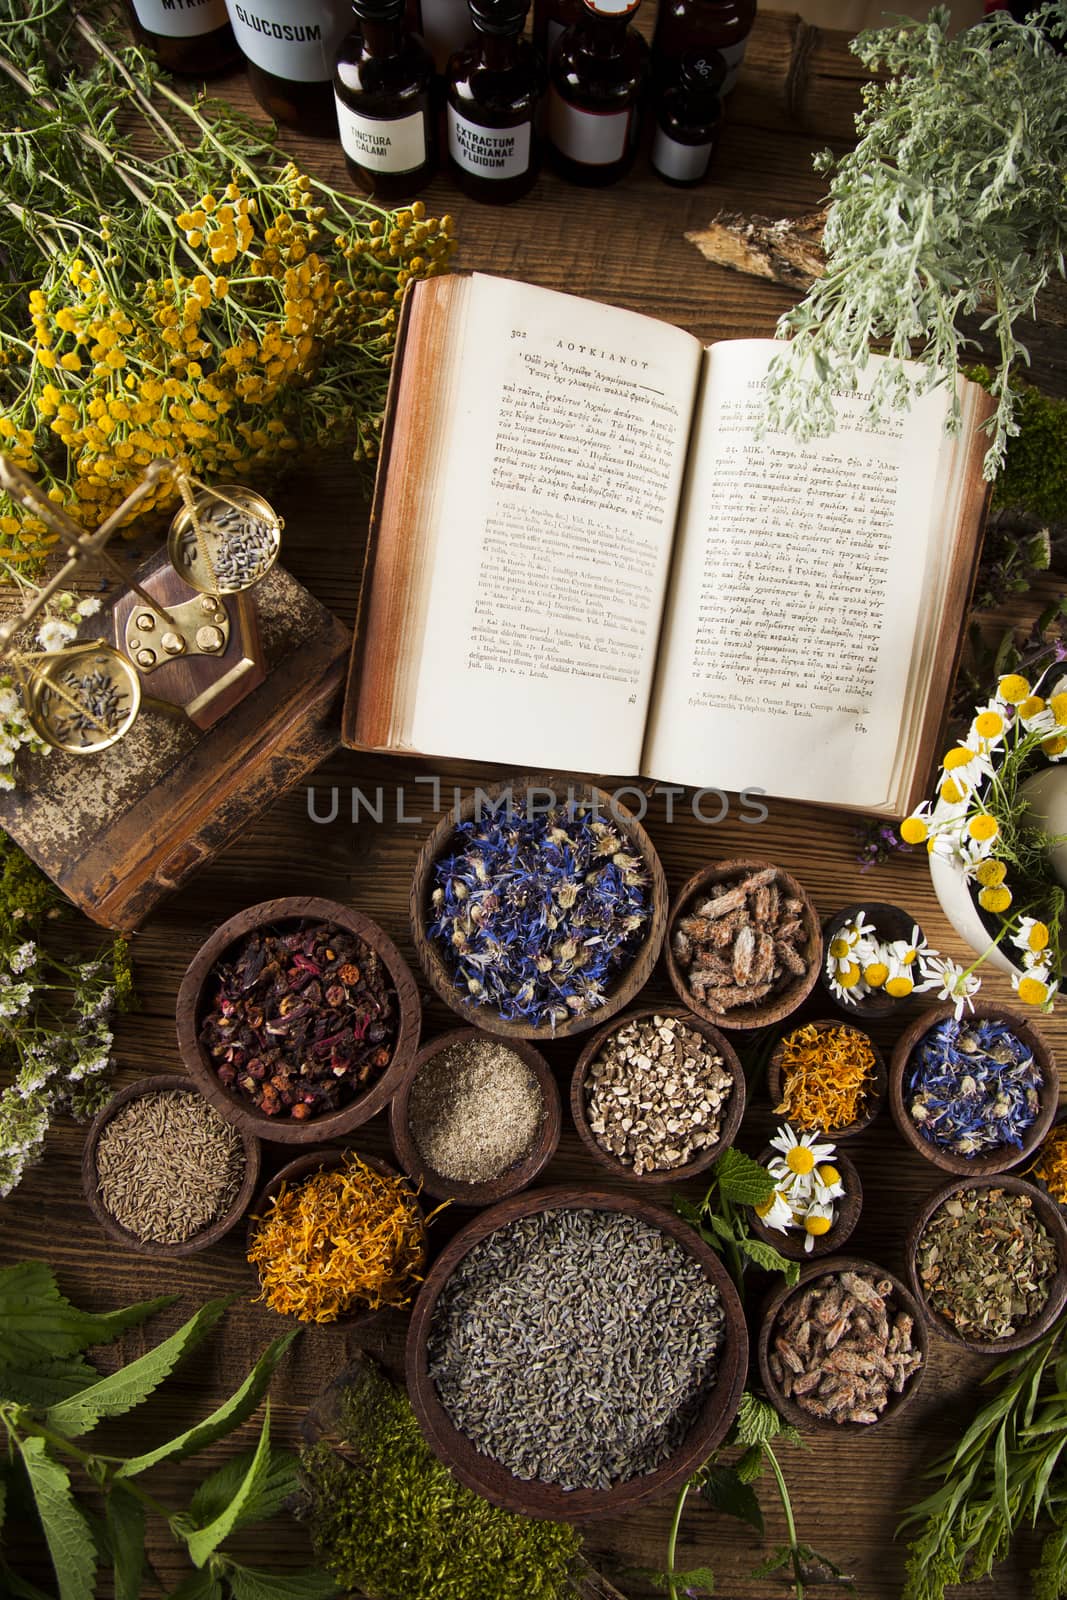 Natural medicine on wooden table background